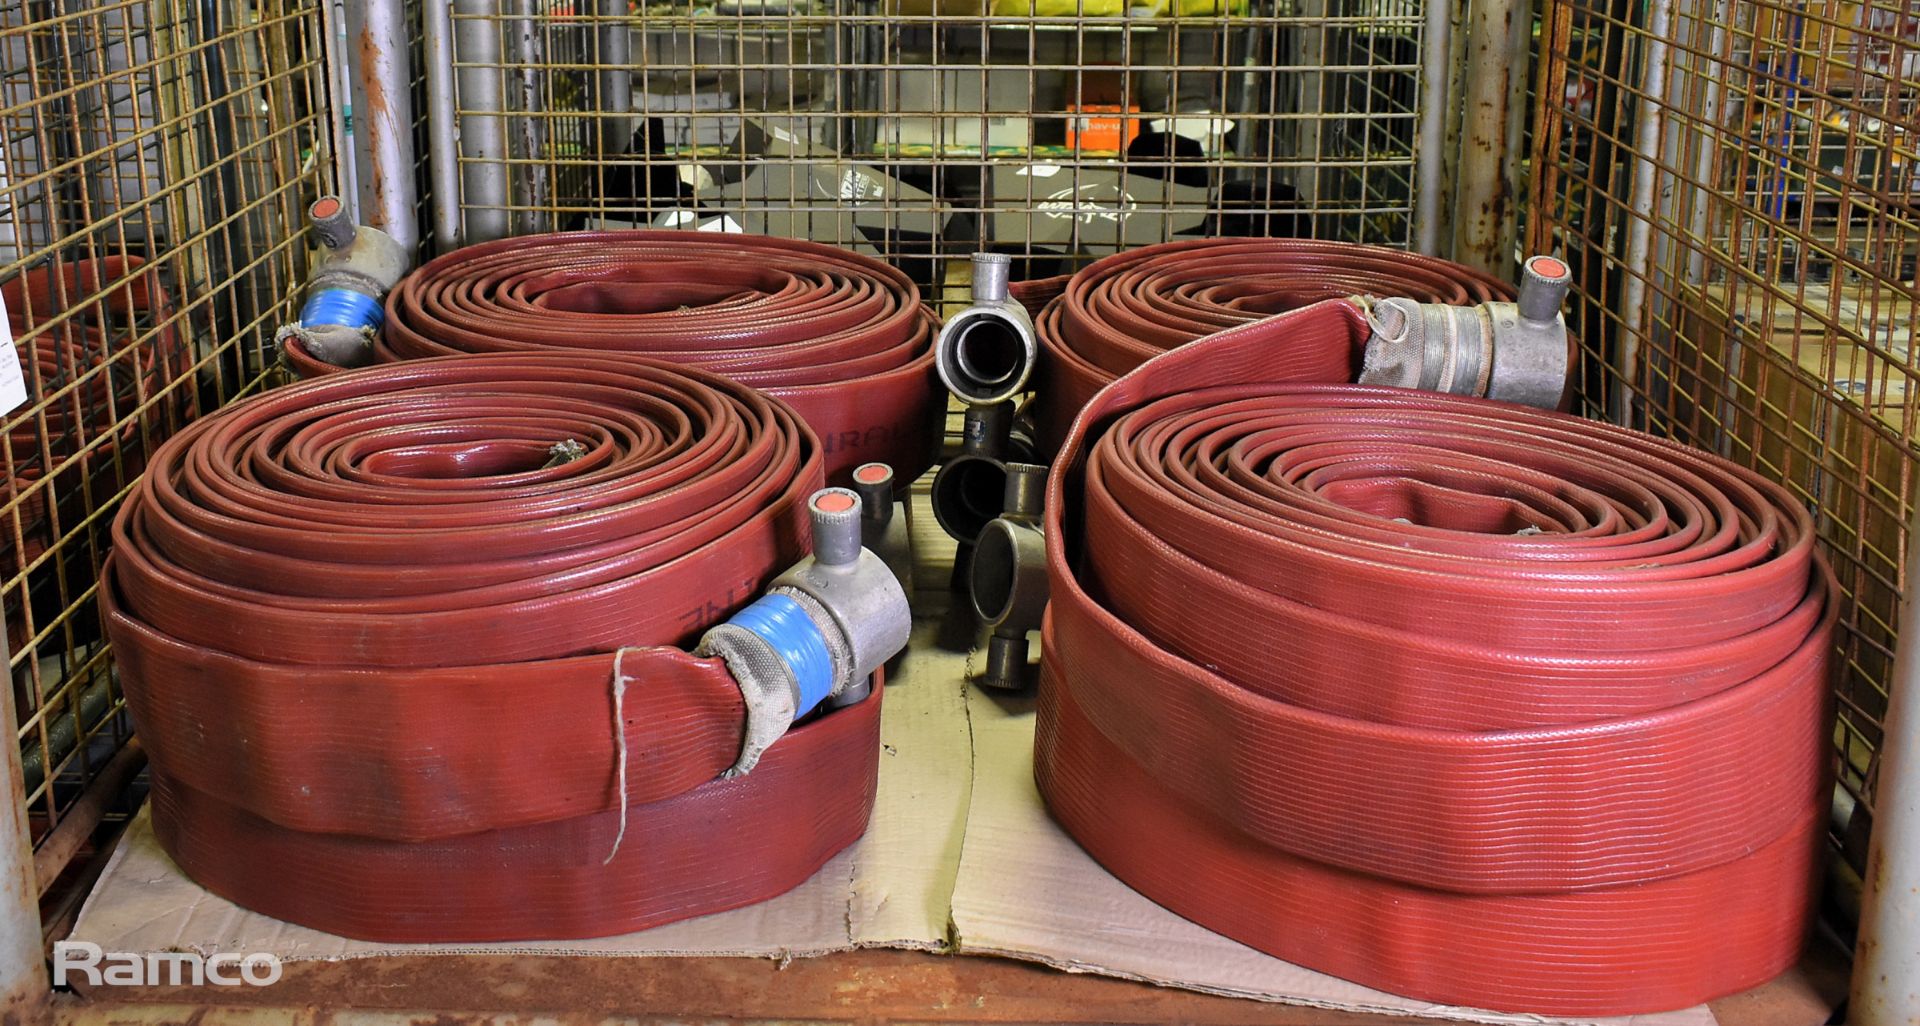 8x Angus Duraline 70mm lay flat hoses with couplings - approx 23m in length - Image 2 of 4